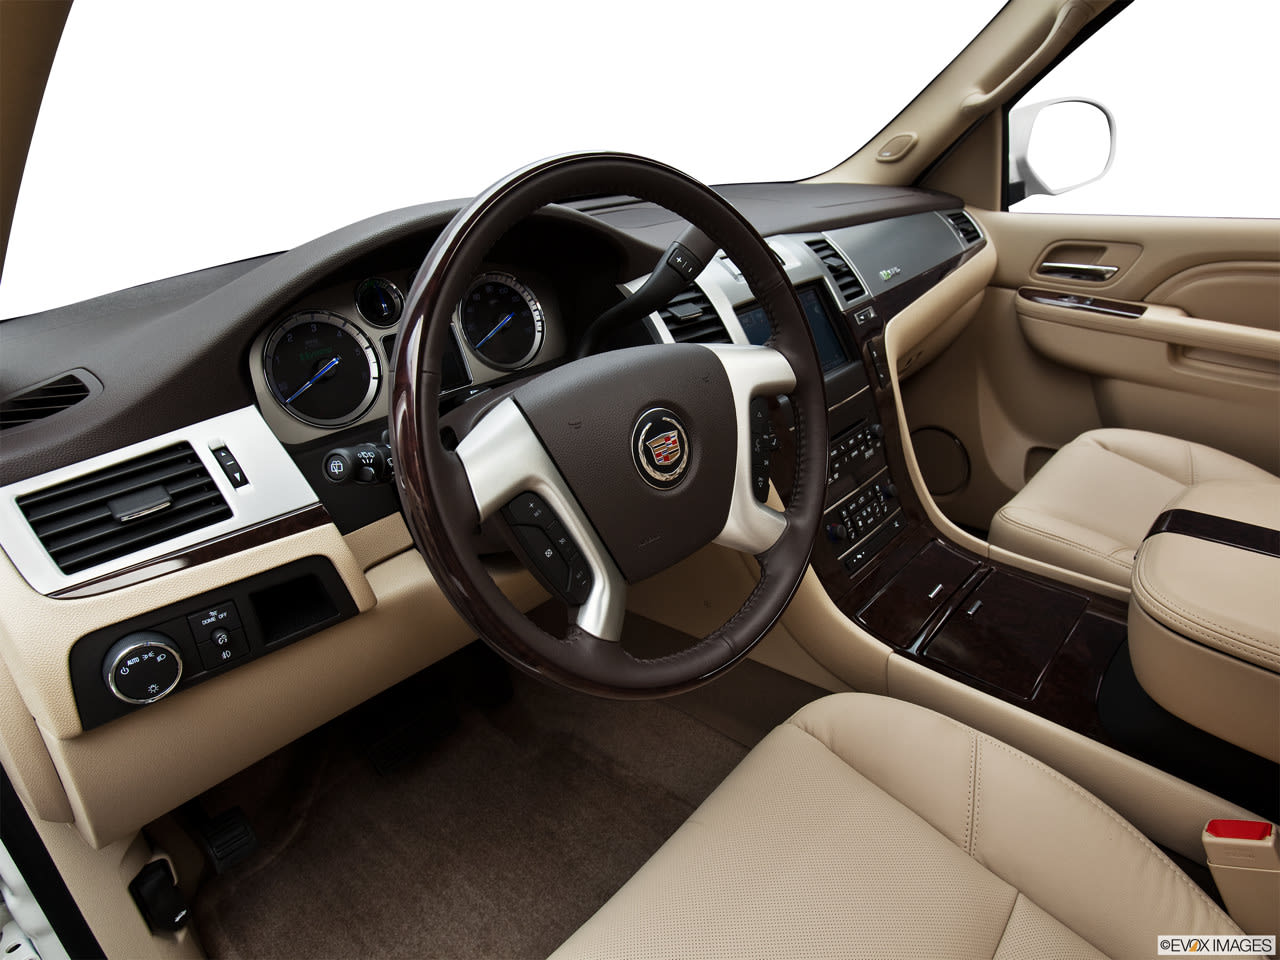 A Buyer's Guide to the 2012 Cadillac Escalade Hybrid | YourMechanic Advice